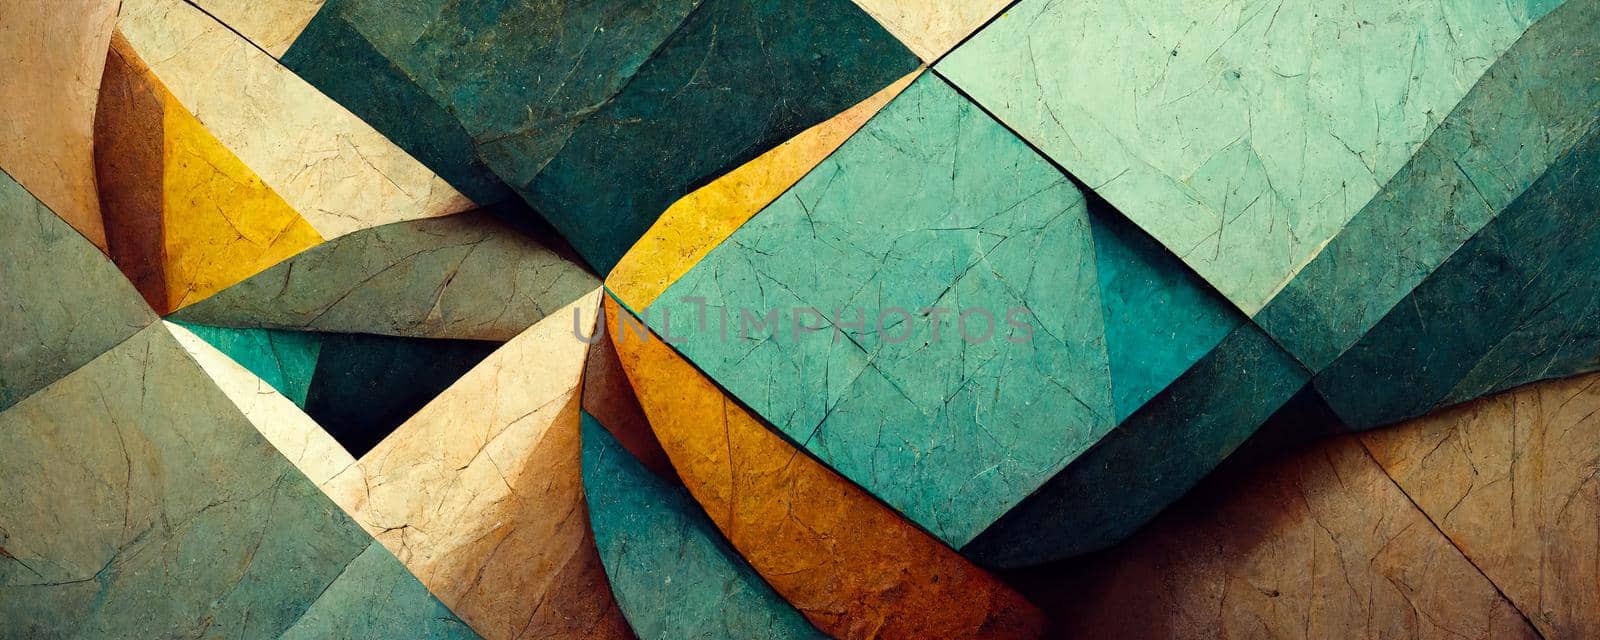 geometric background with polygons in turquoise and gold hues.